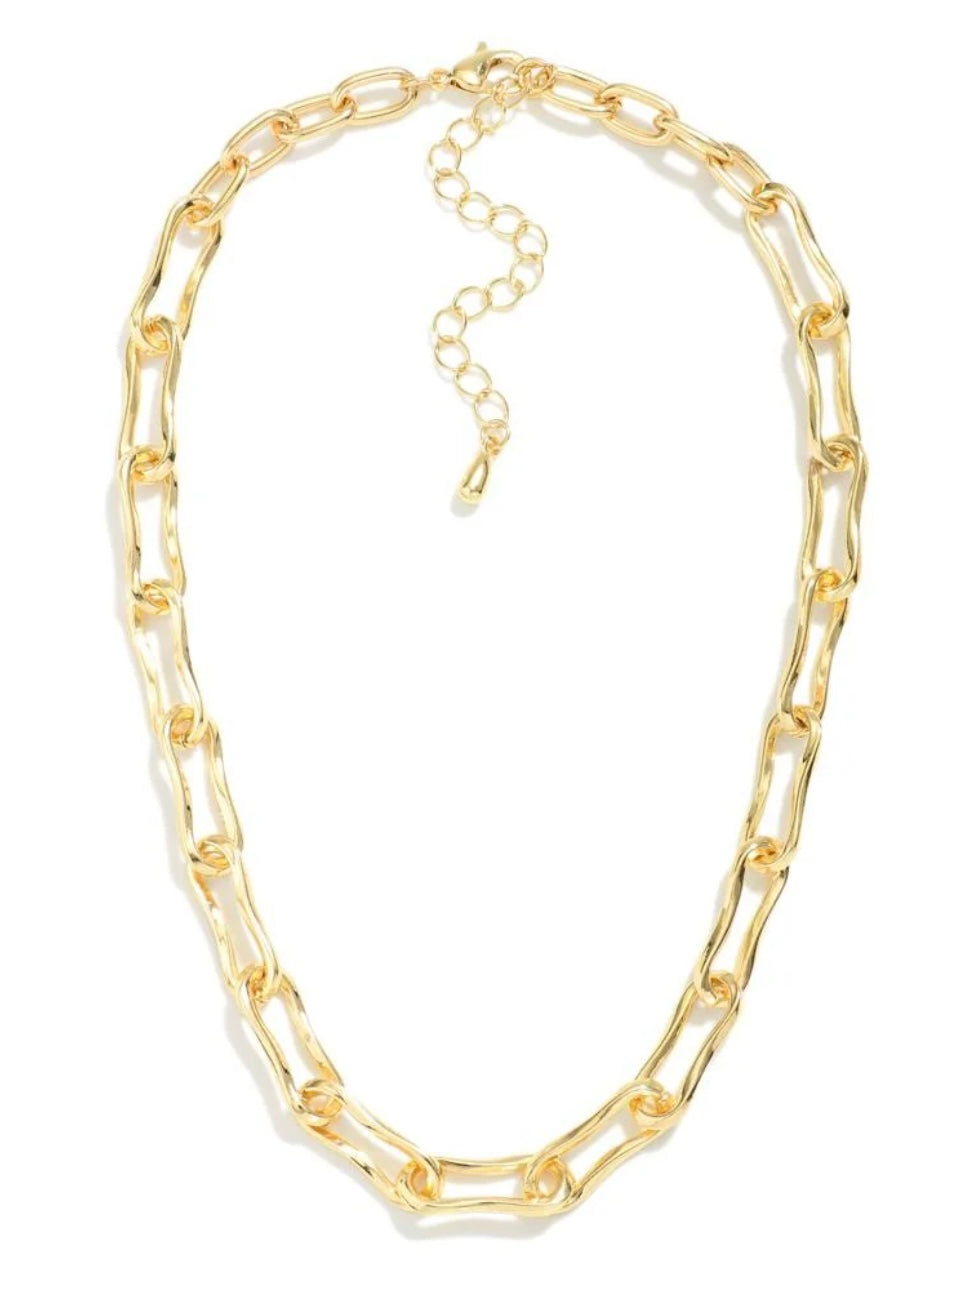 PEANUT CHAIN LINK NECKLACE